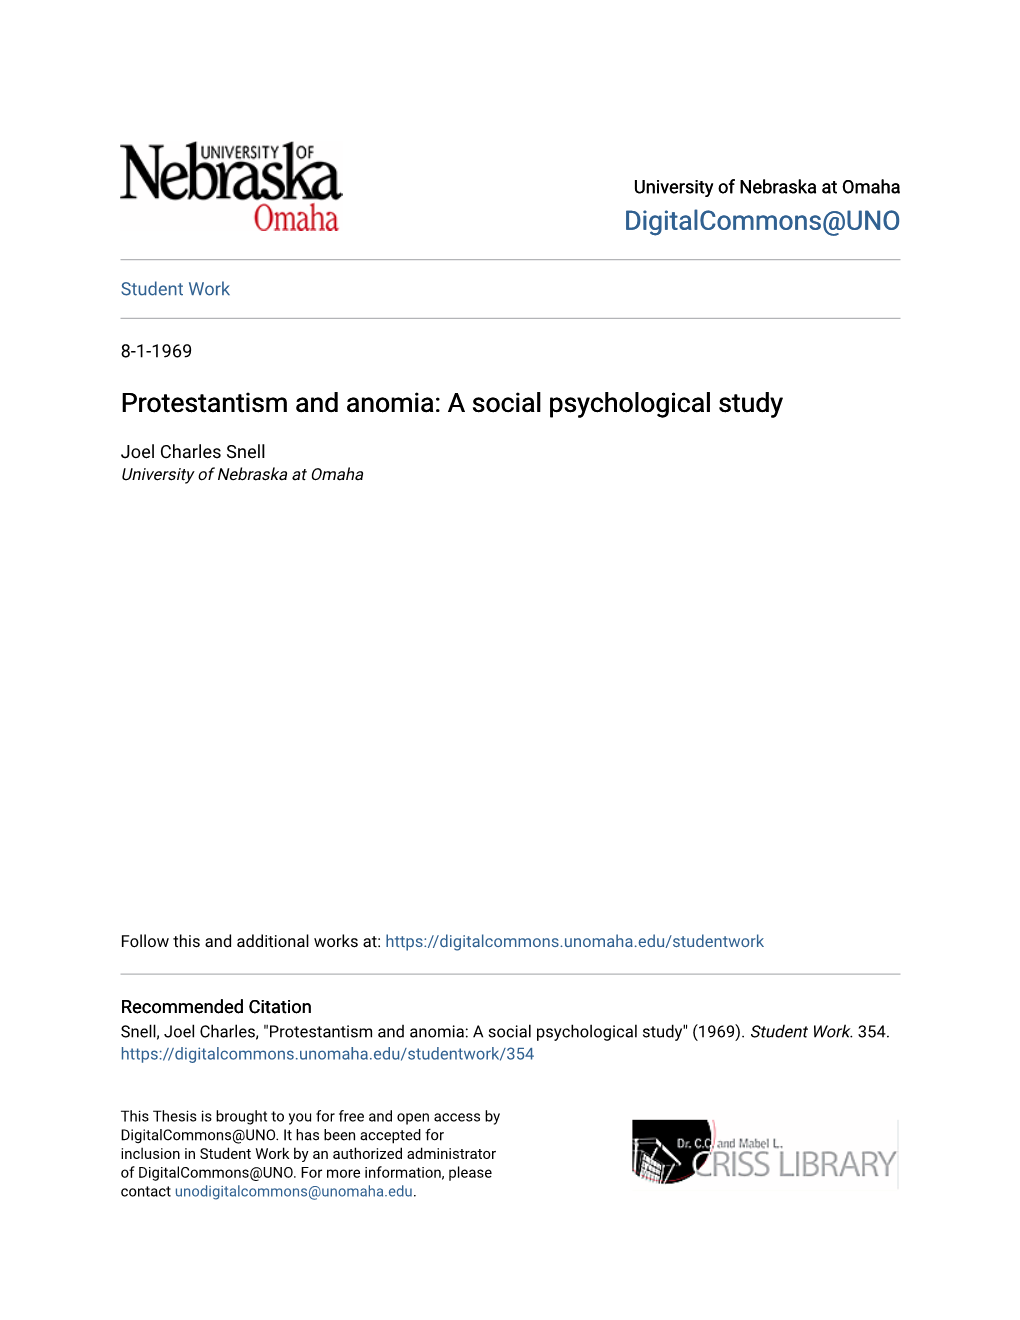 Protestantism and Anomia: a Social Psychological Study